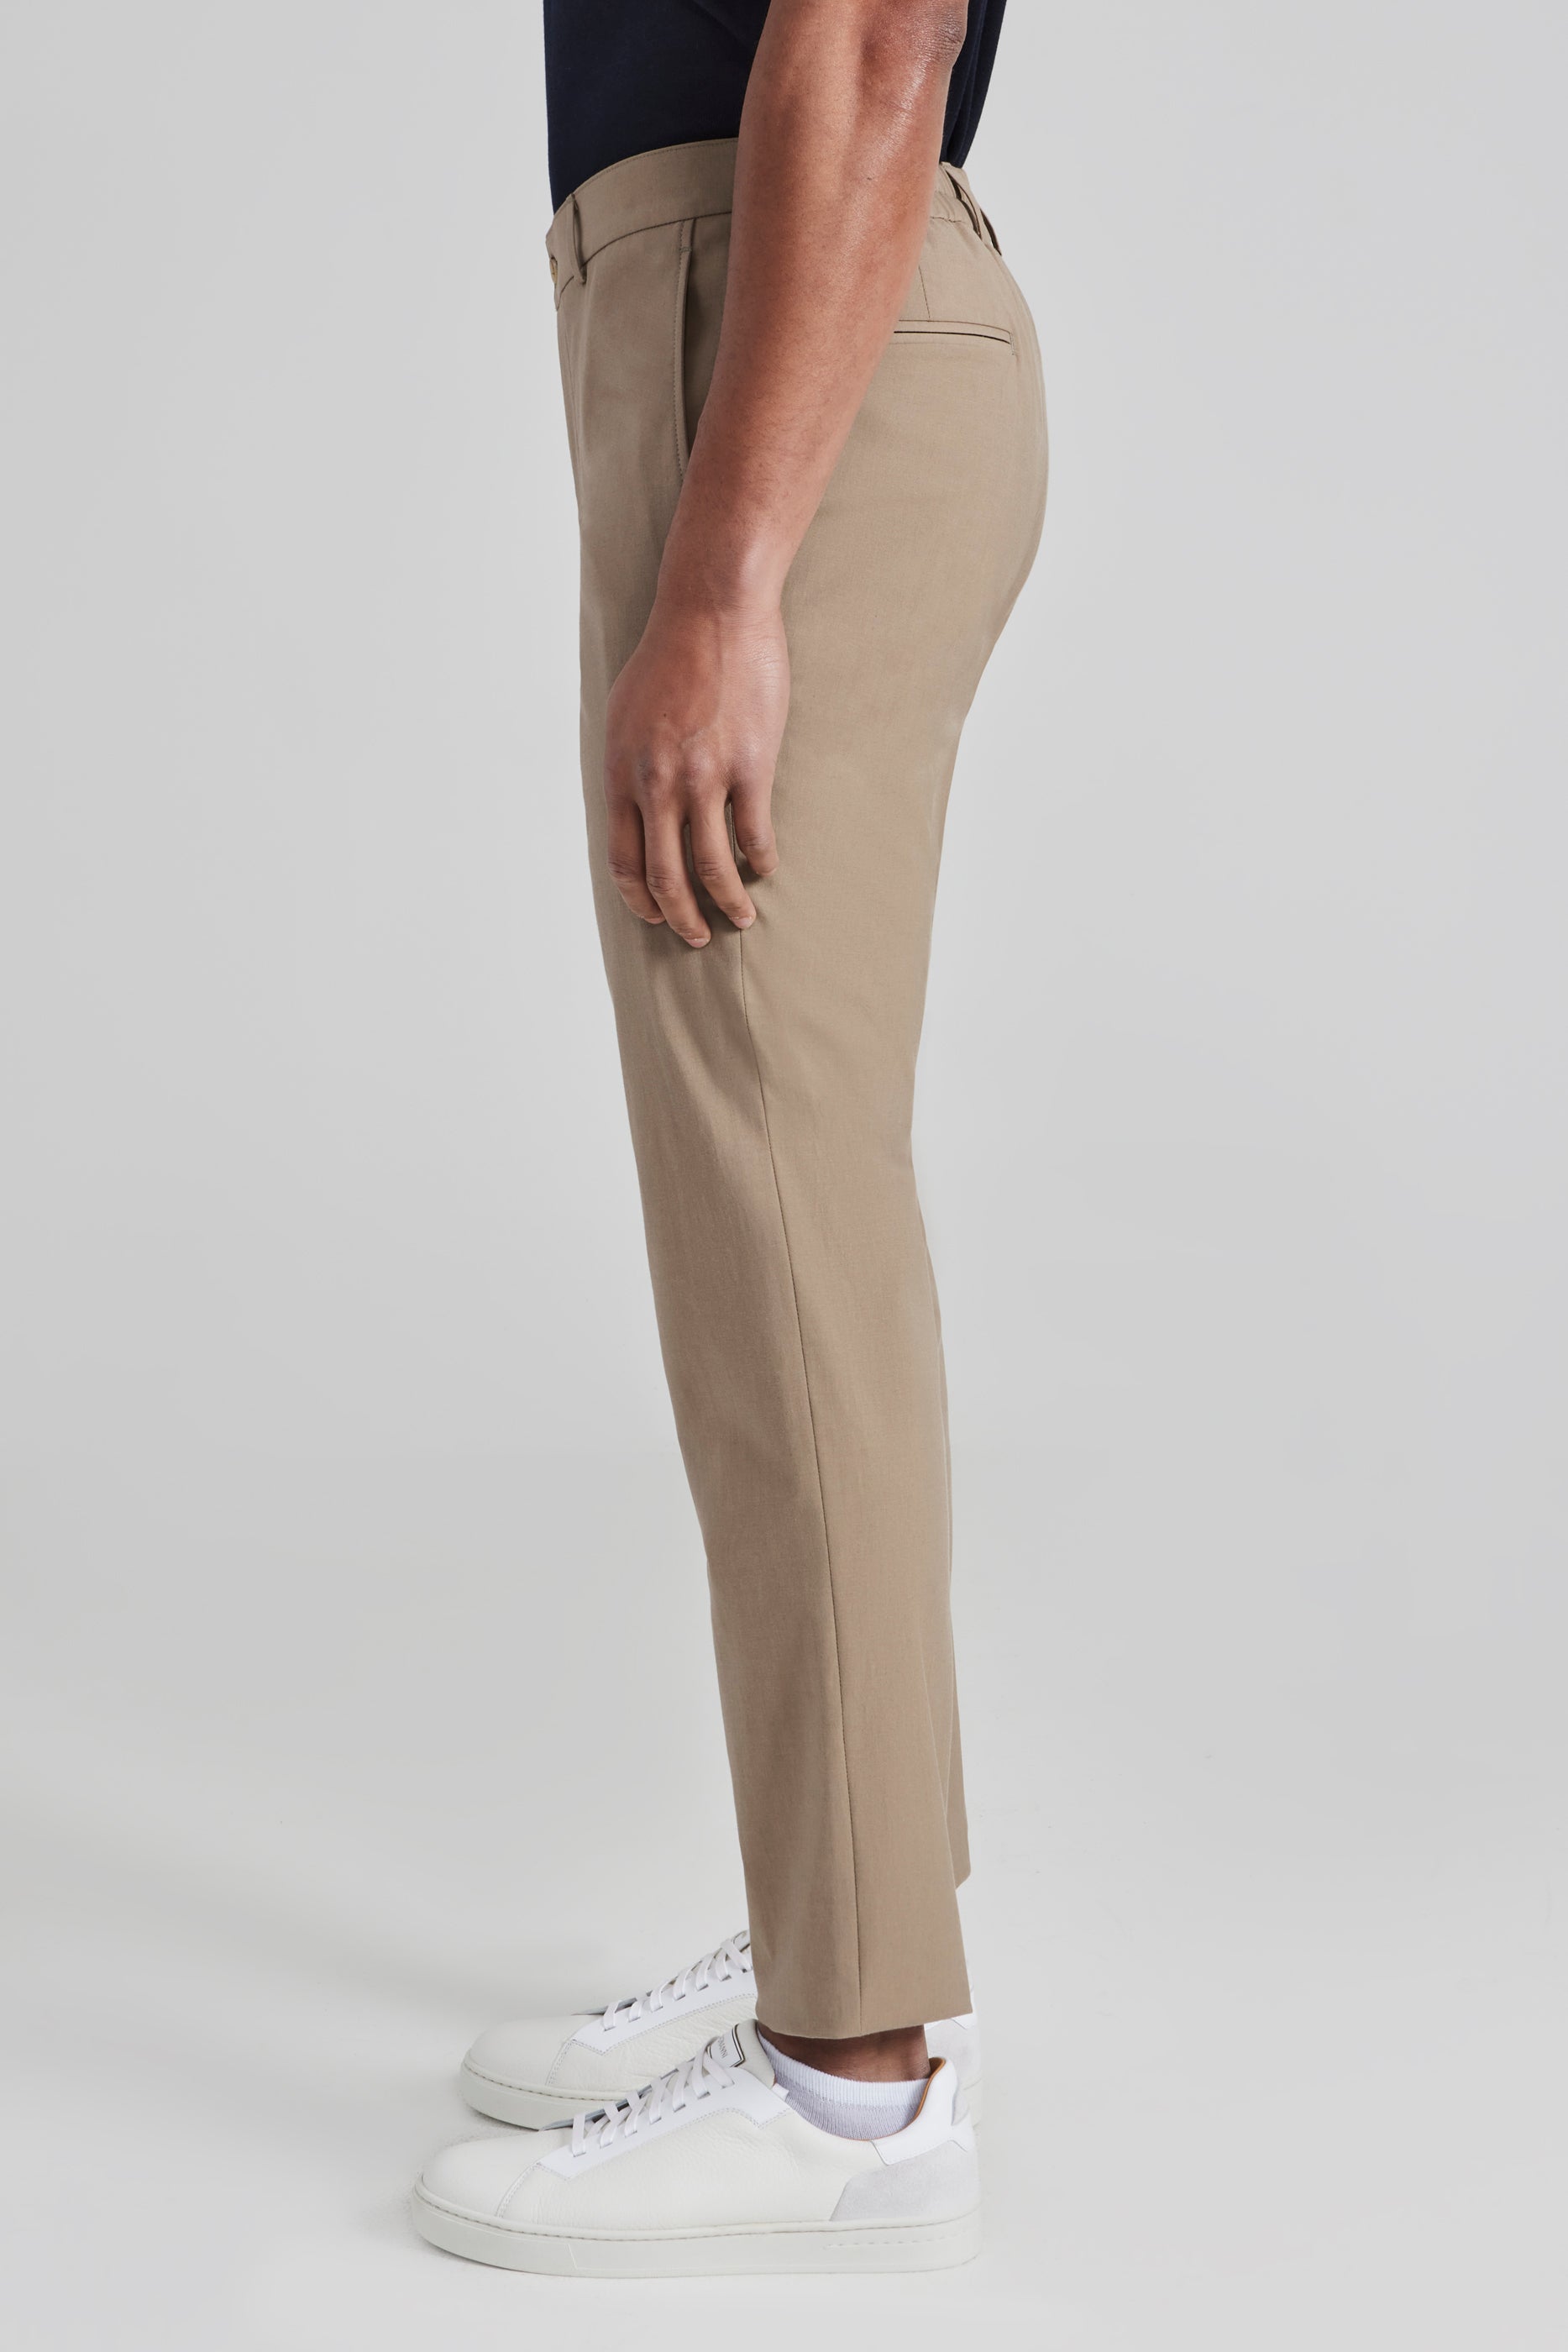 Alt view 3 Perth Wool and Cotton Stretch Pant in Camel